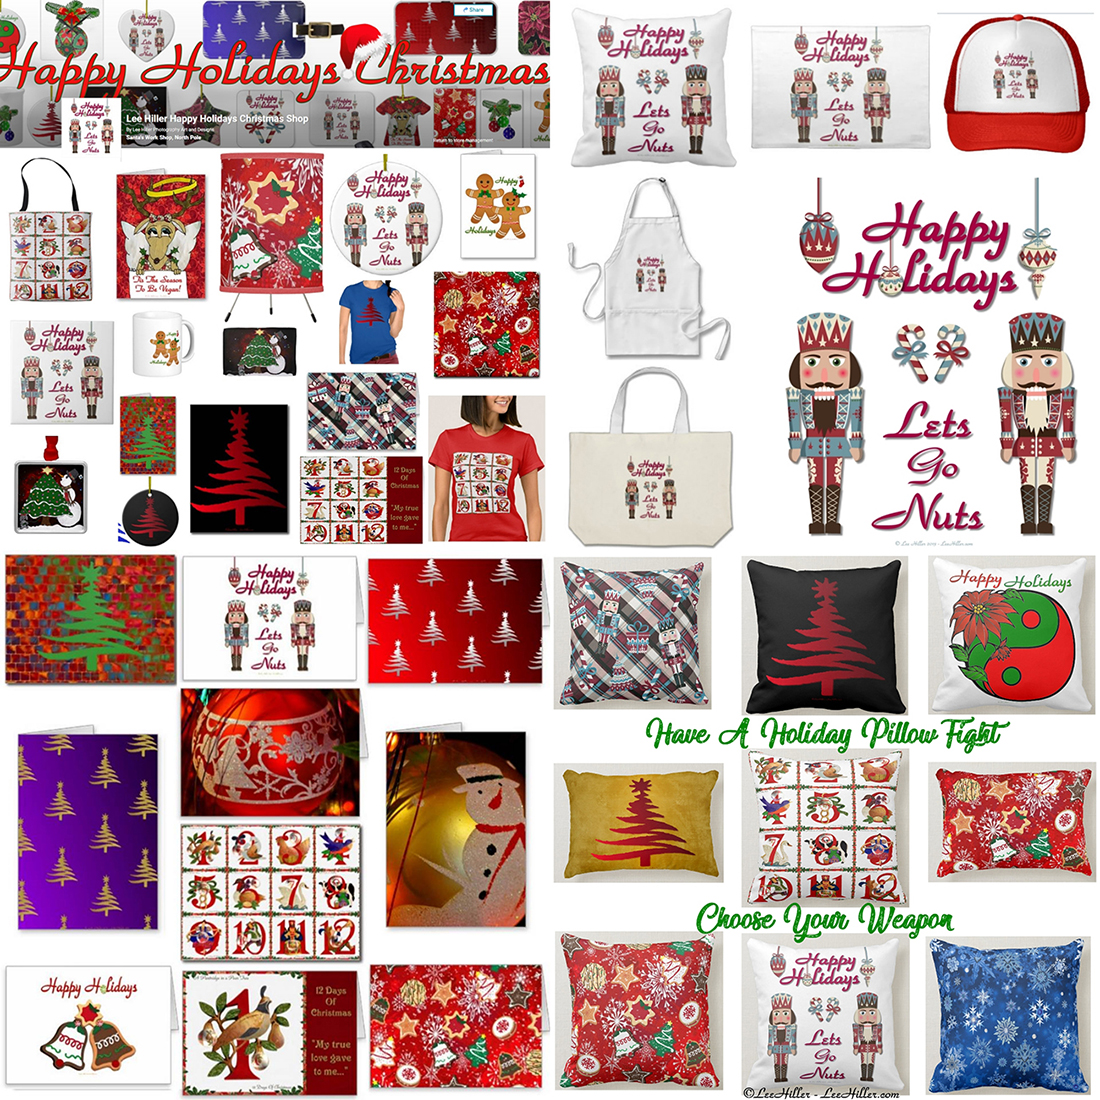 🌟🎄🎁🎄🎁🎄🌟
The #HappyHolidays Shop is Always Open!
#Christmas #12DaysOfChristmas #ChristmasTree #snowflake #Nutcracker #poinsettia #Gingerbread #holidaycheer #Christmas2023 #holidaydecor #gifts #giftideas #homedecor #scapbooking #crafting

bitly.com/ZHolidayShop